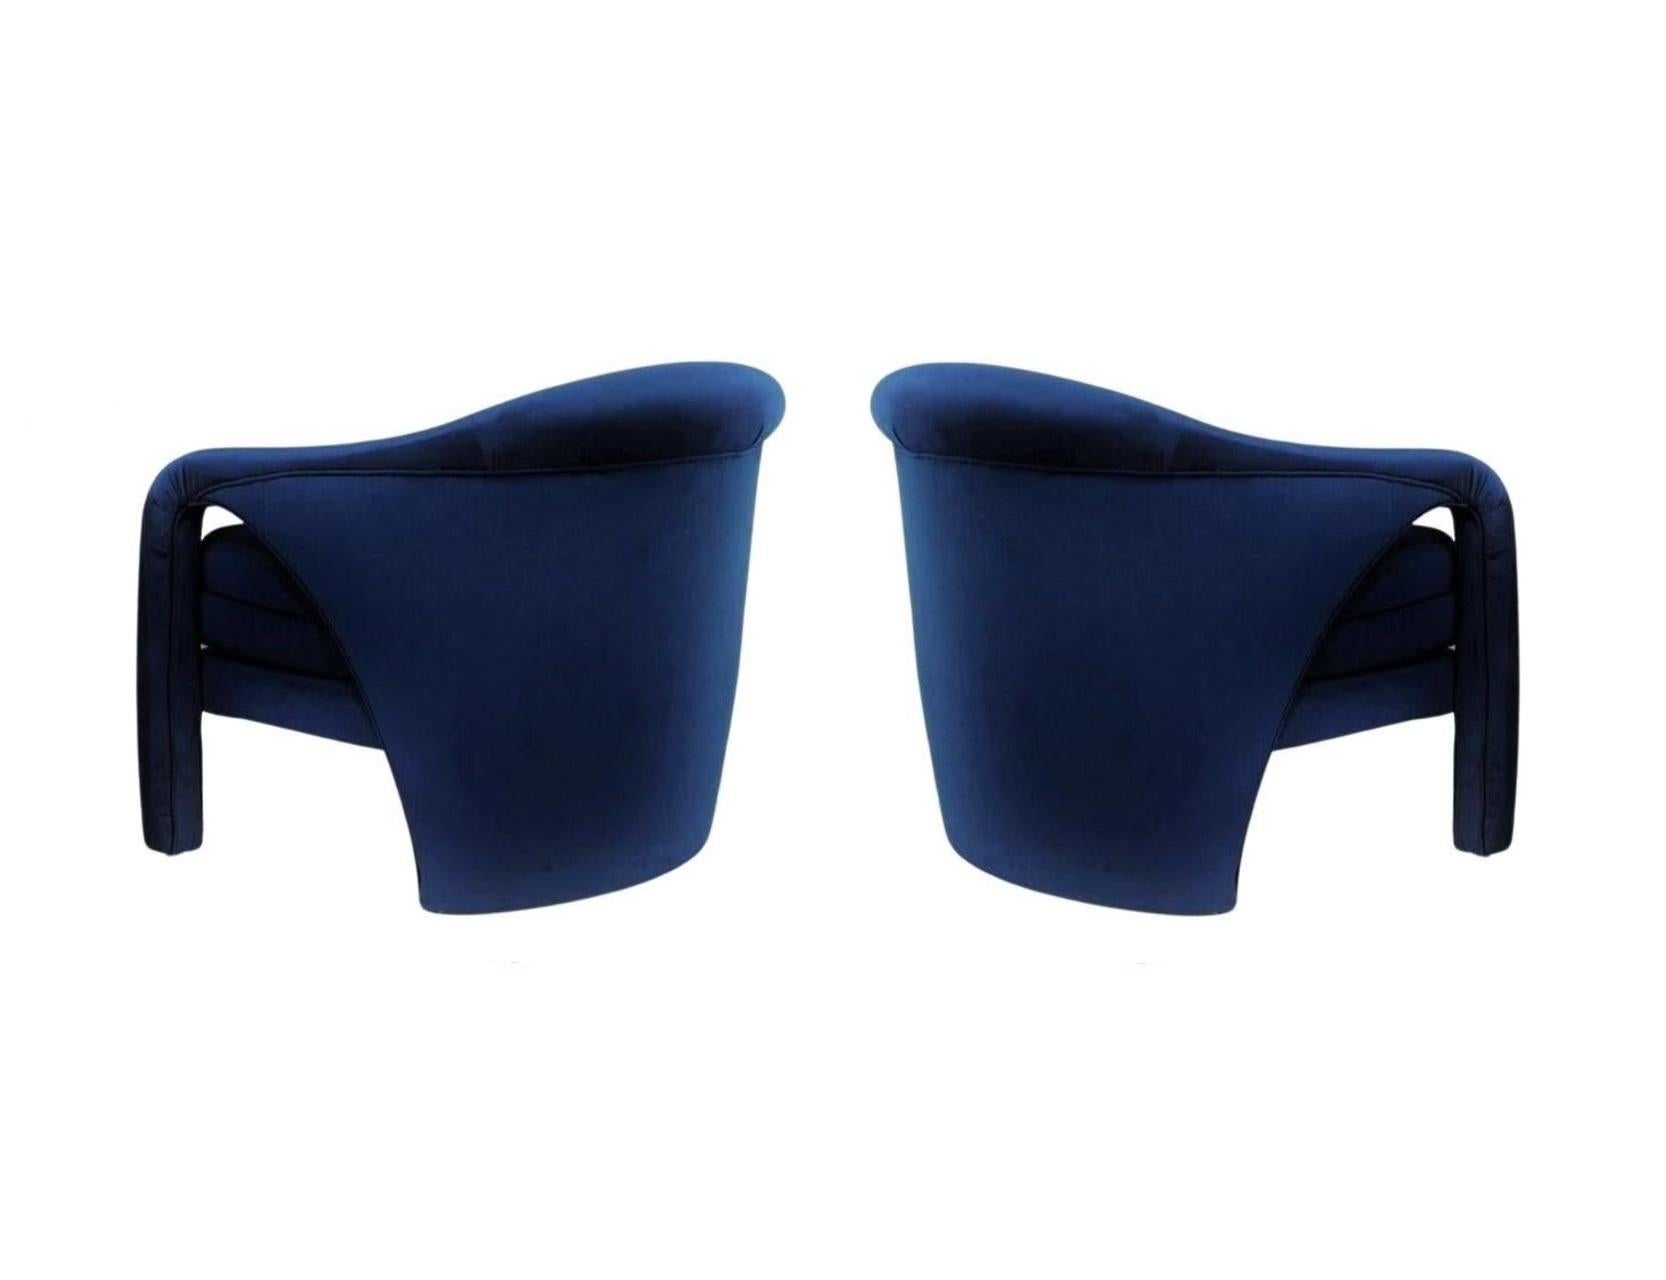 Vladimir Kaganesque Navy Blue Lounge Chairs by Weiman For Sale 5